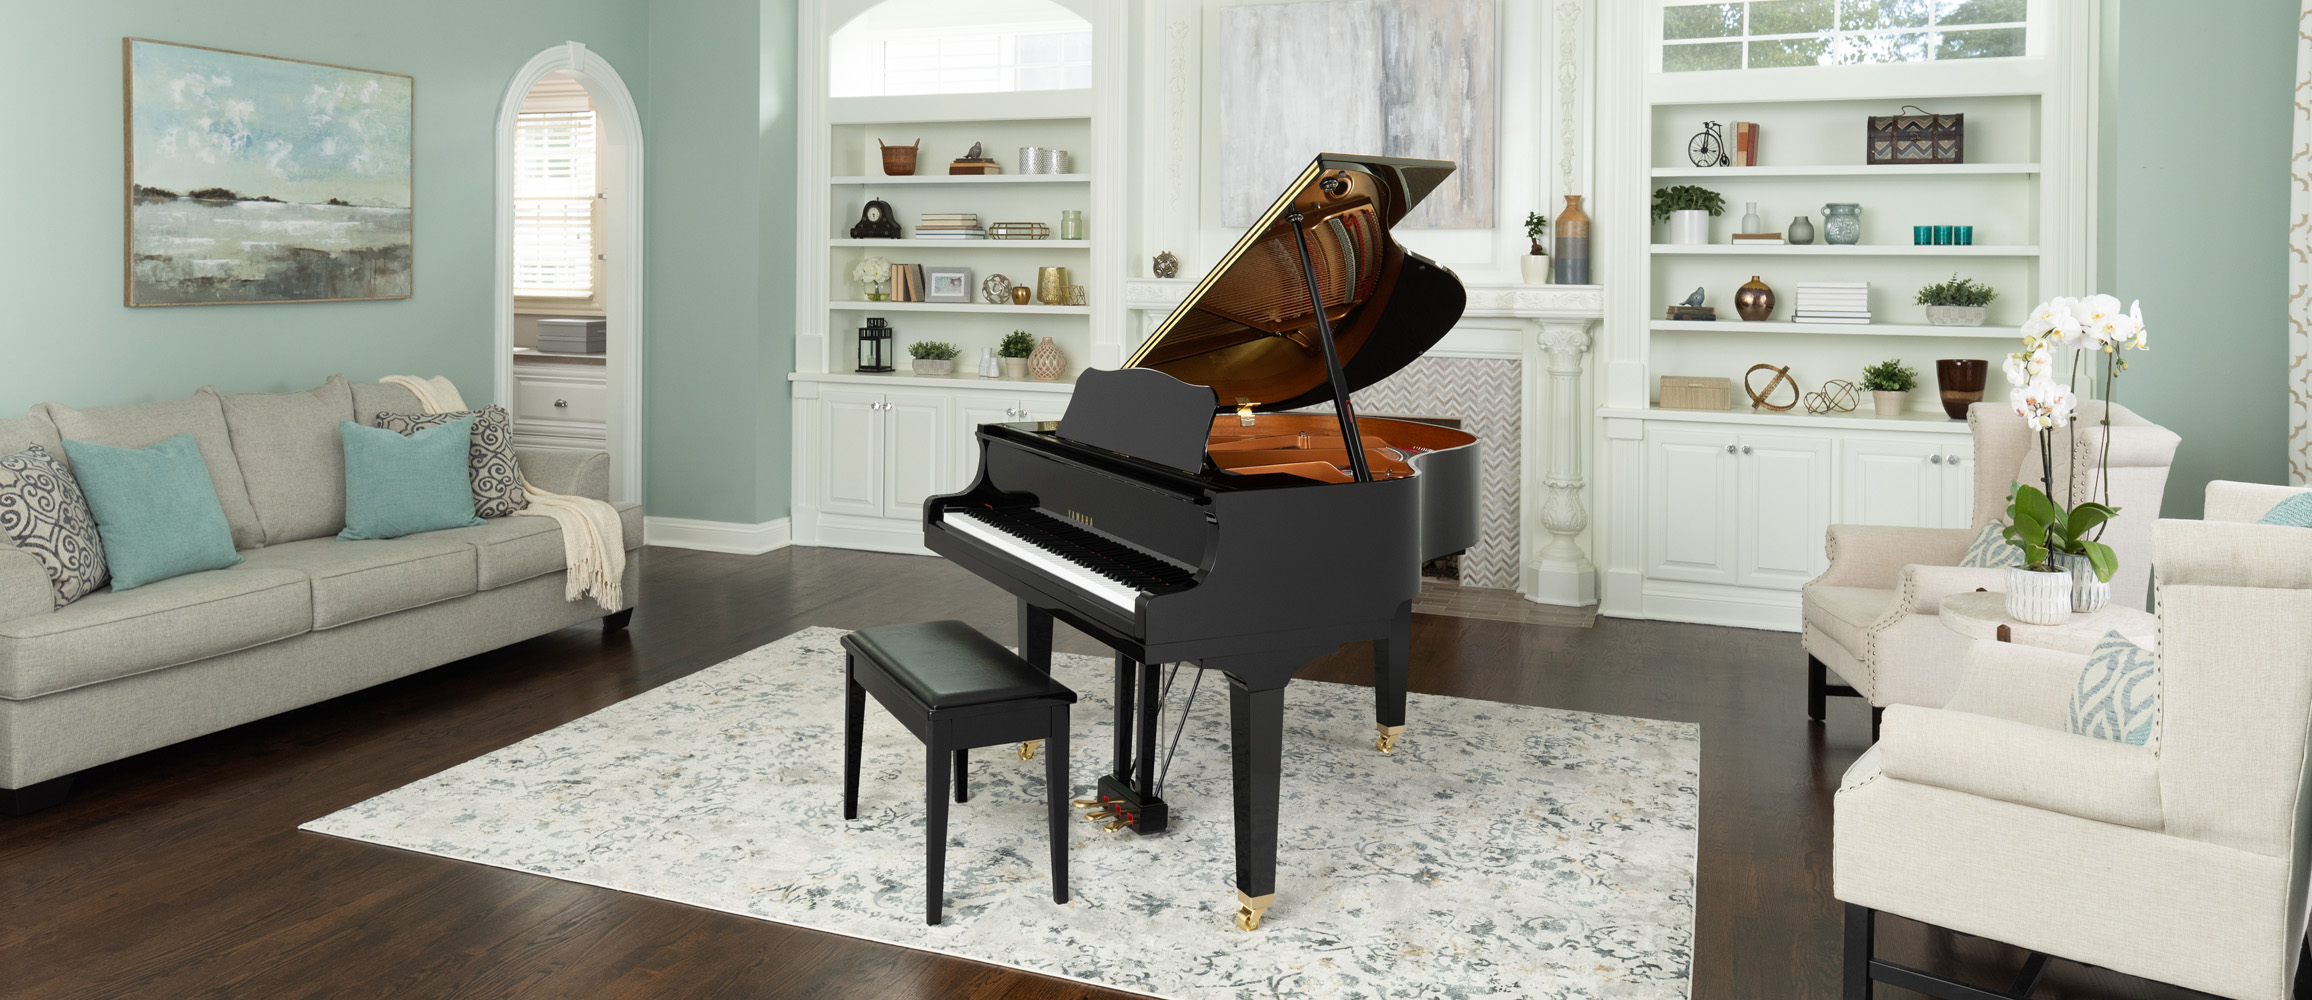 hero image of GB1KGC piano in a living room